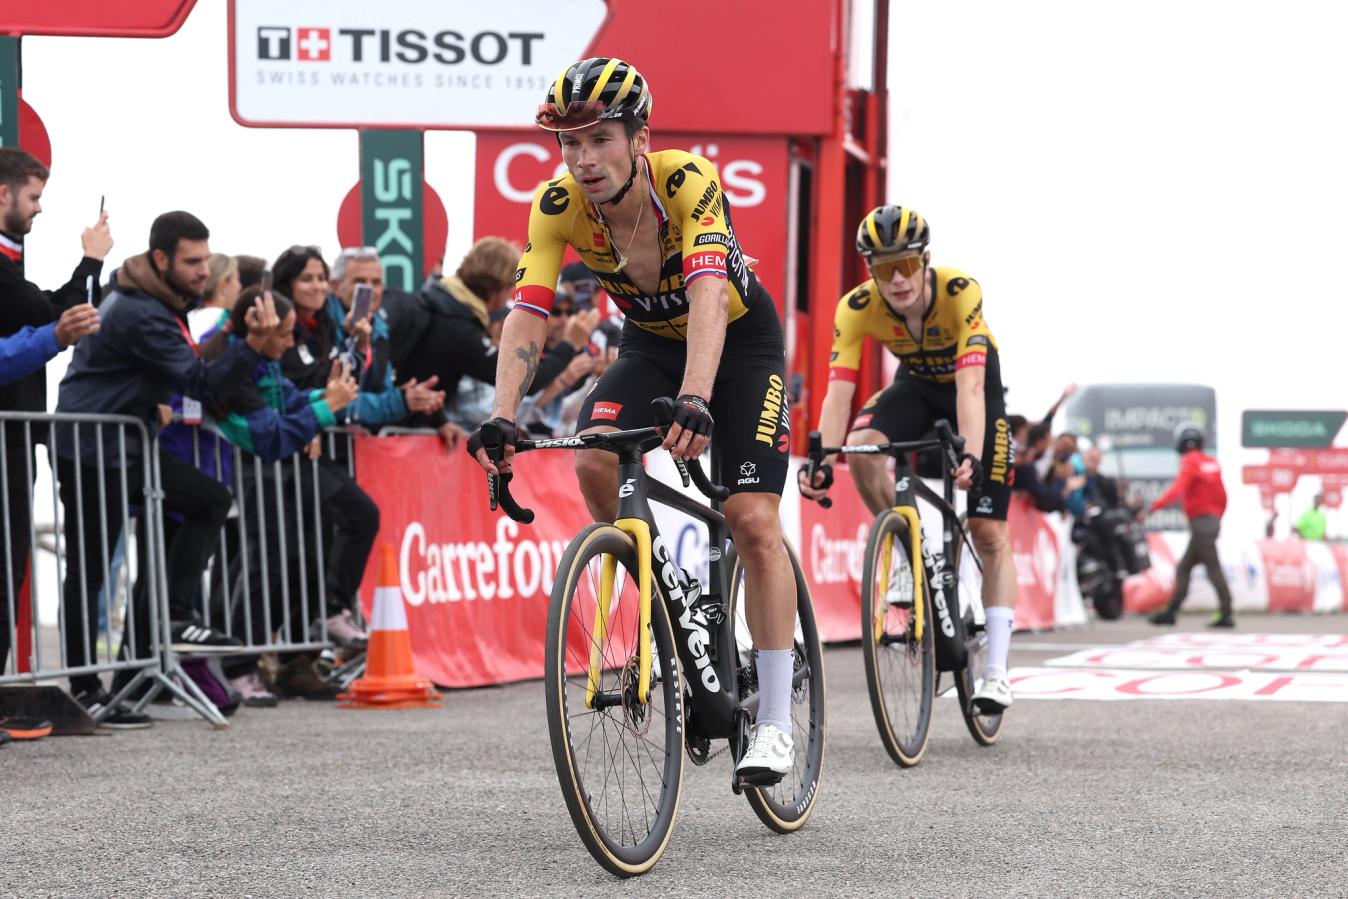 Primoz Roglic and Jonas Vingegaard cross the line on stage 17 of the Vuelta a España